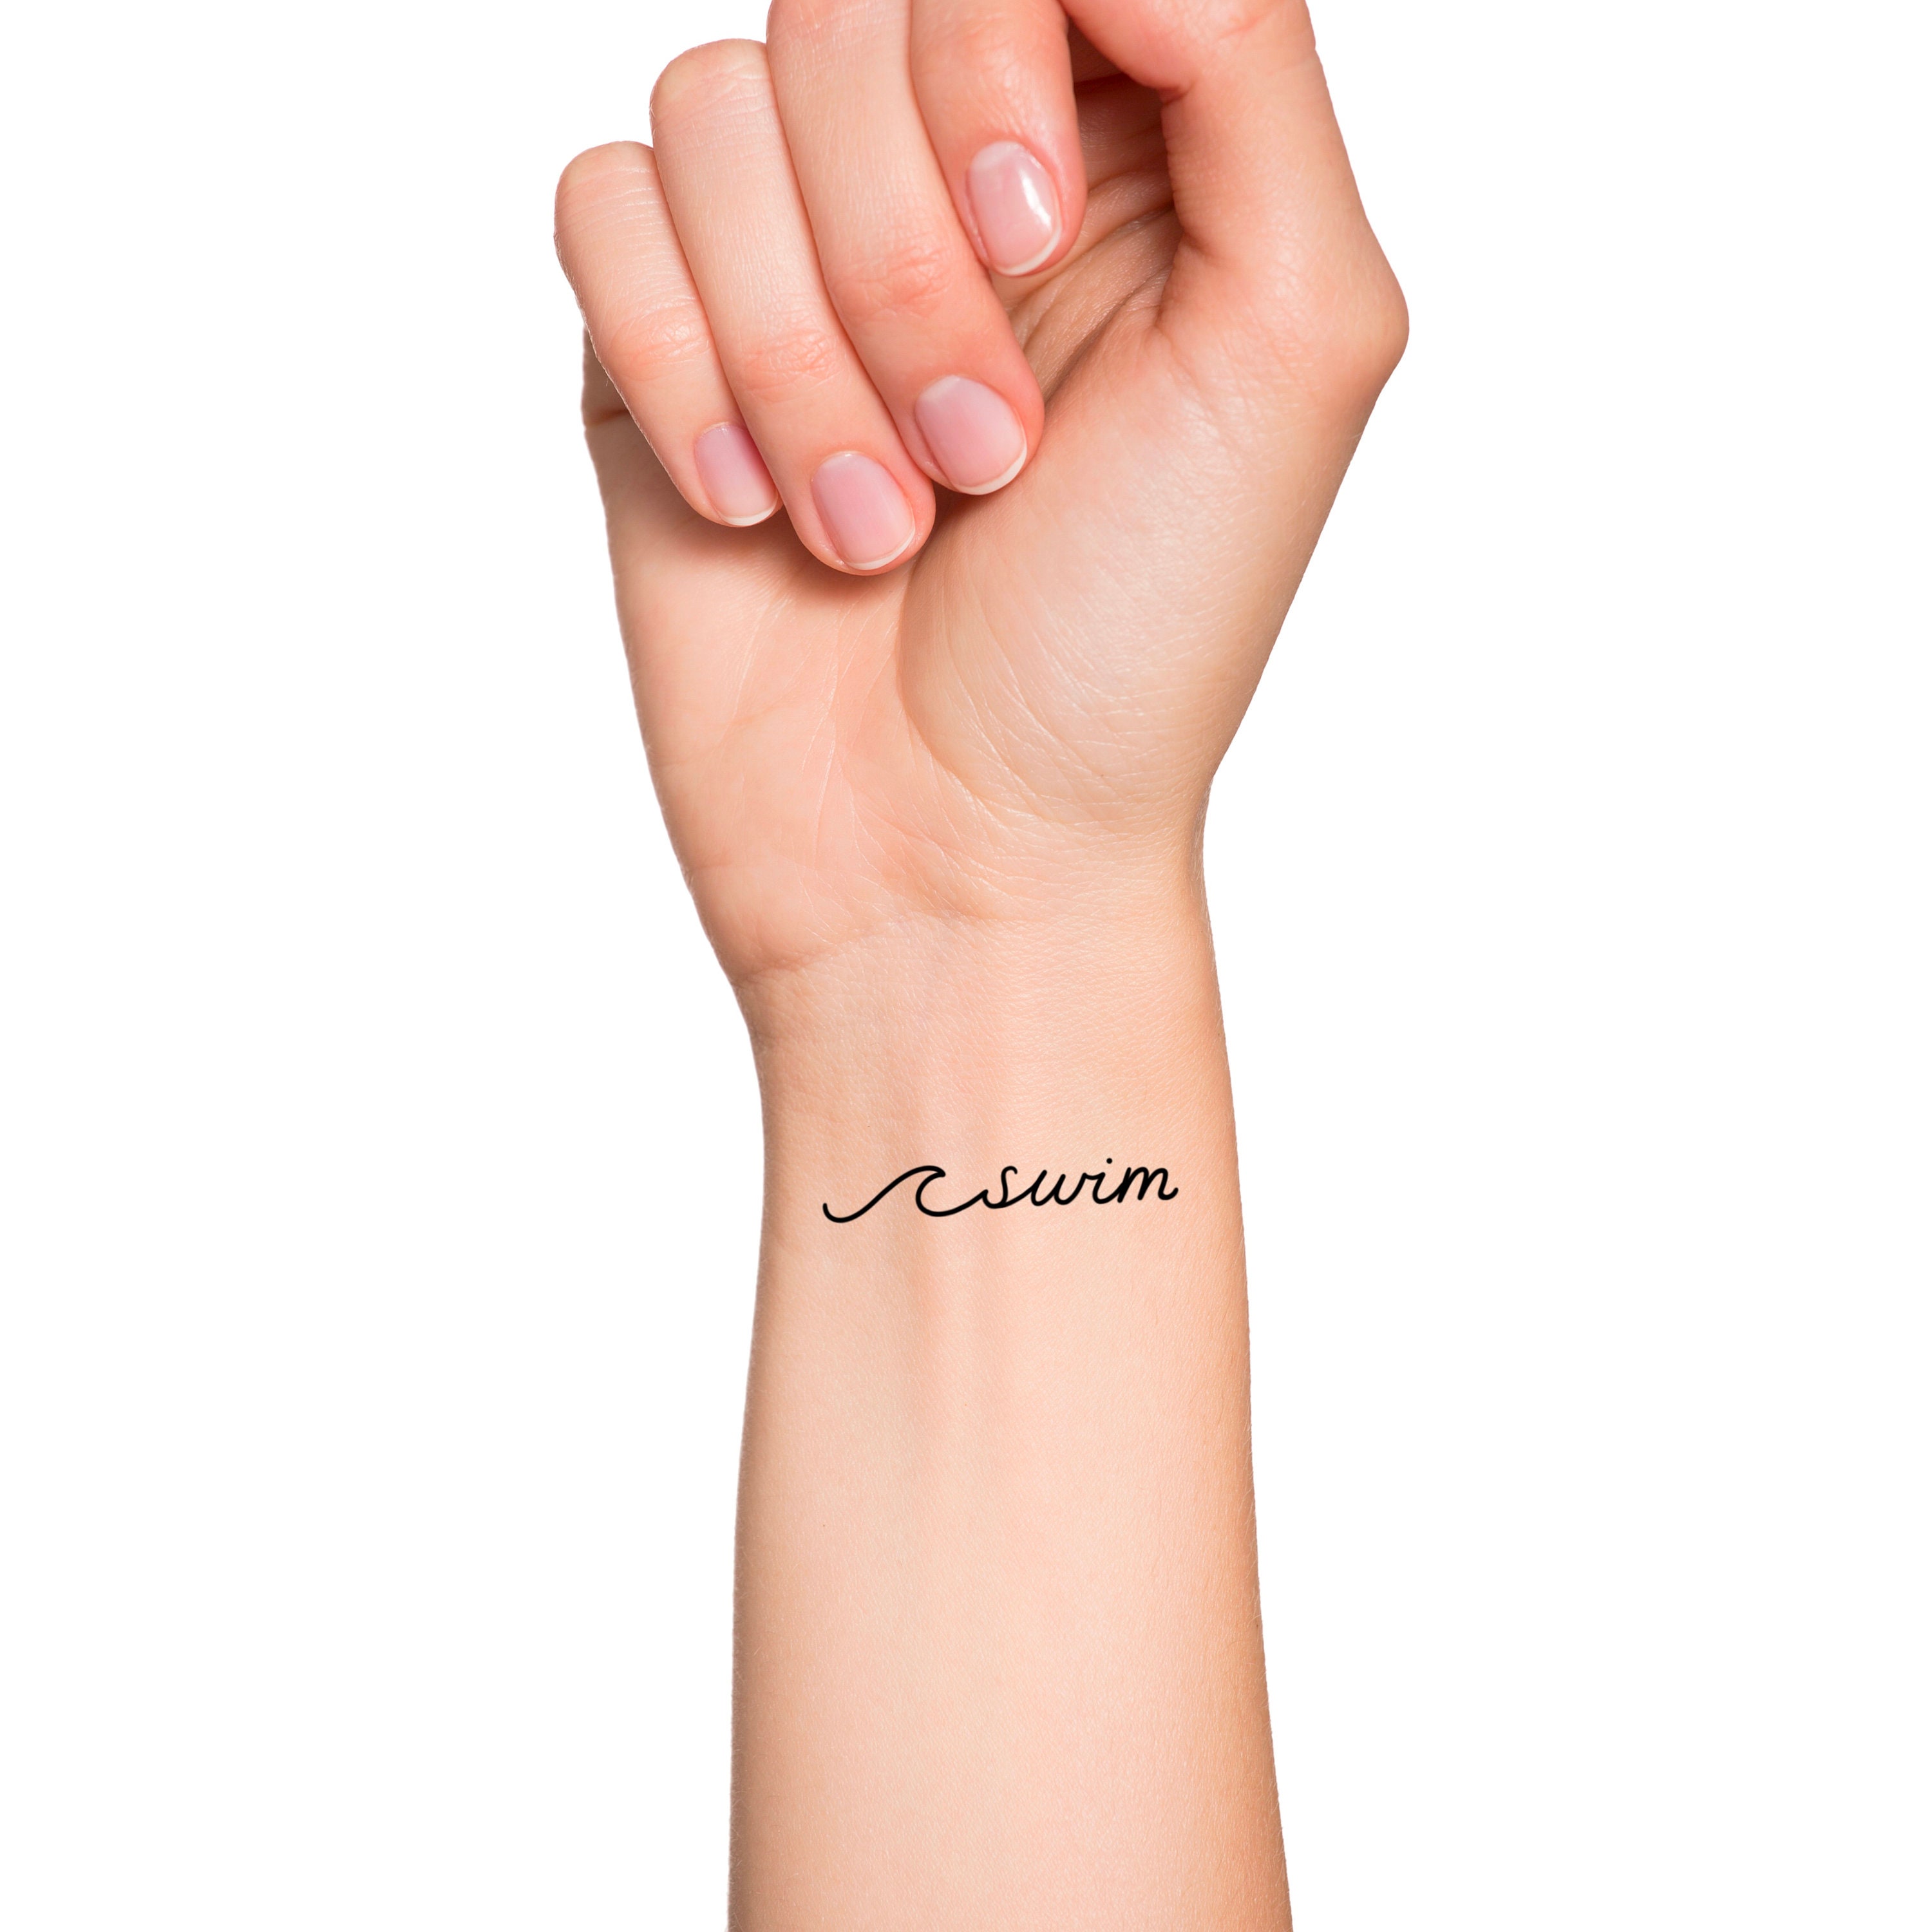 One Word Tattoos Cool Looking Popular Examples  Design Press